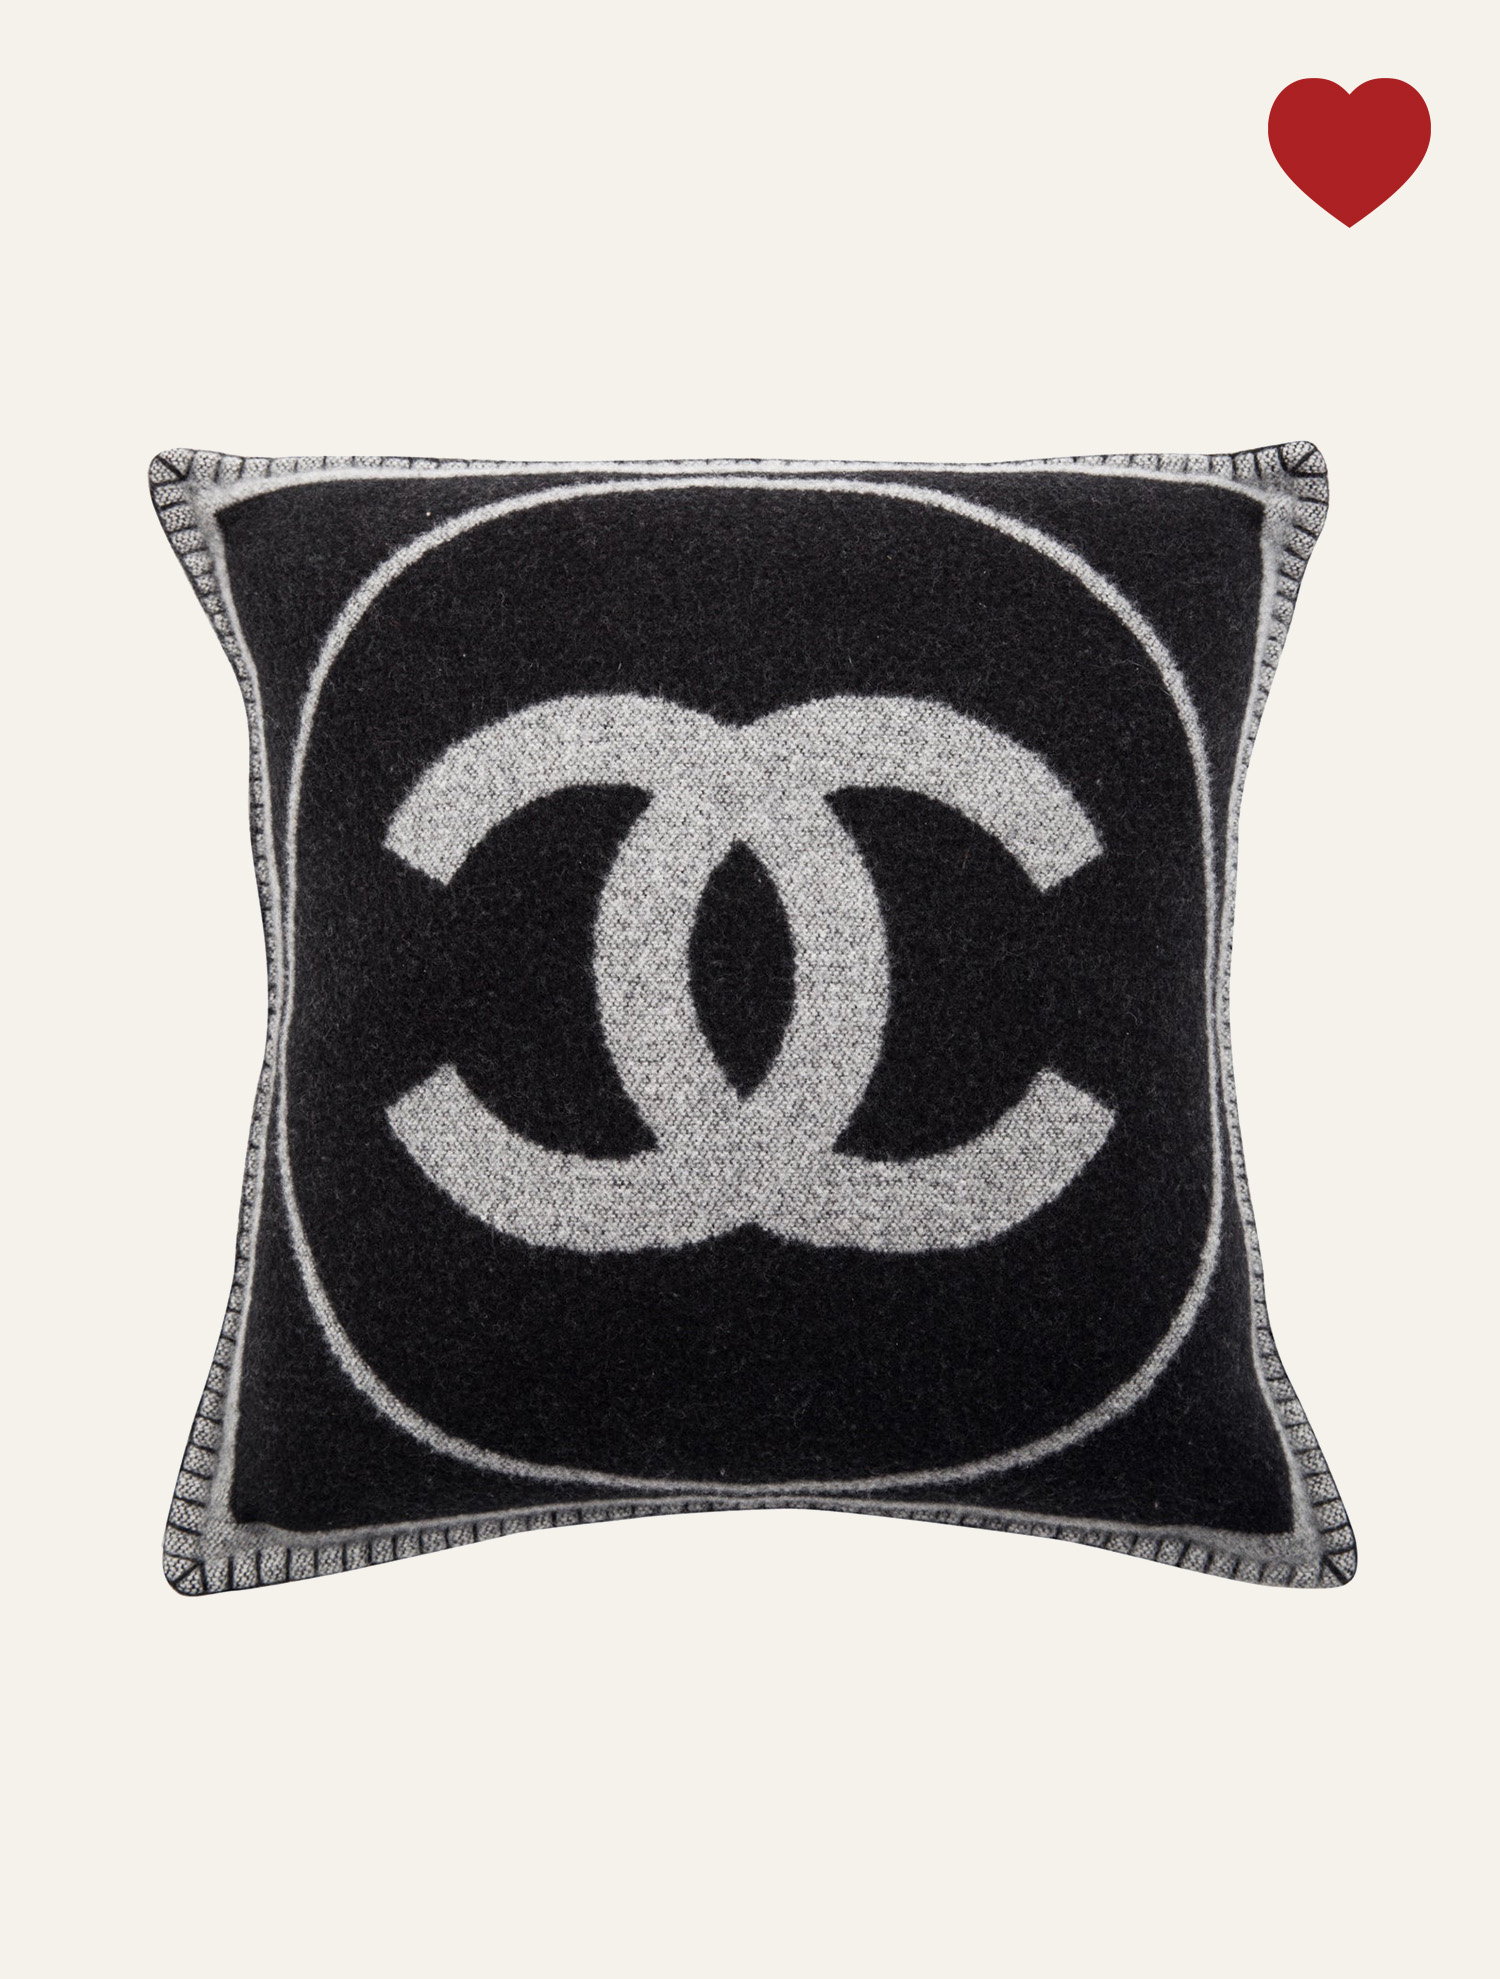 Resale Report Products-Chanel